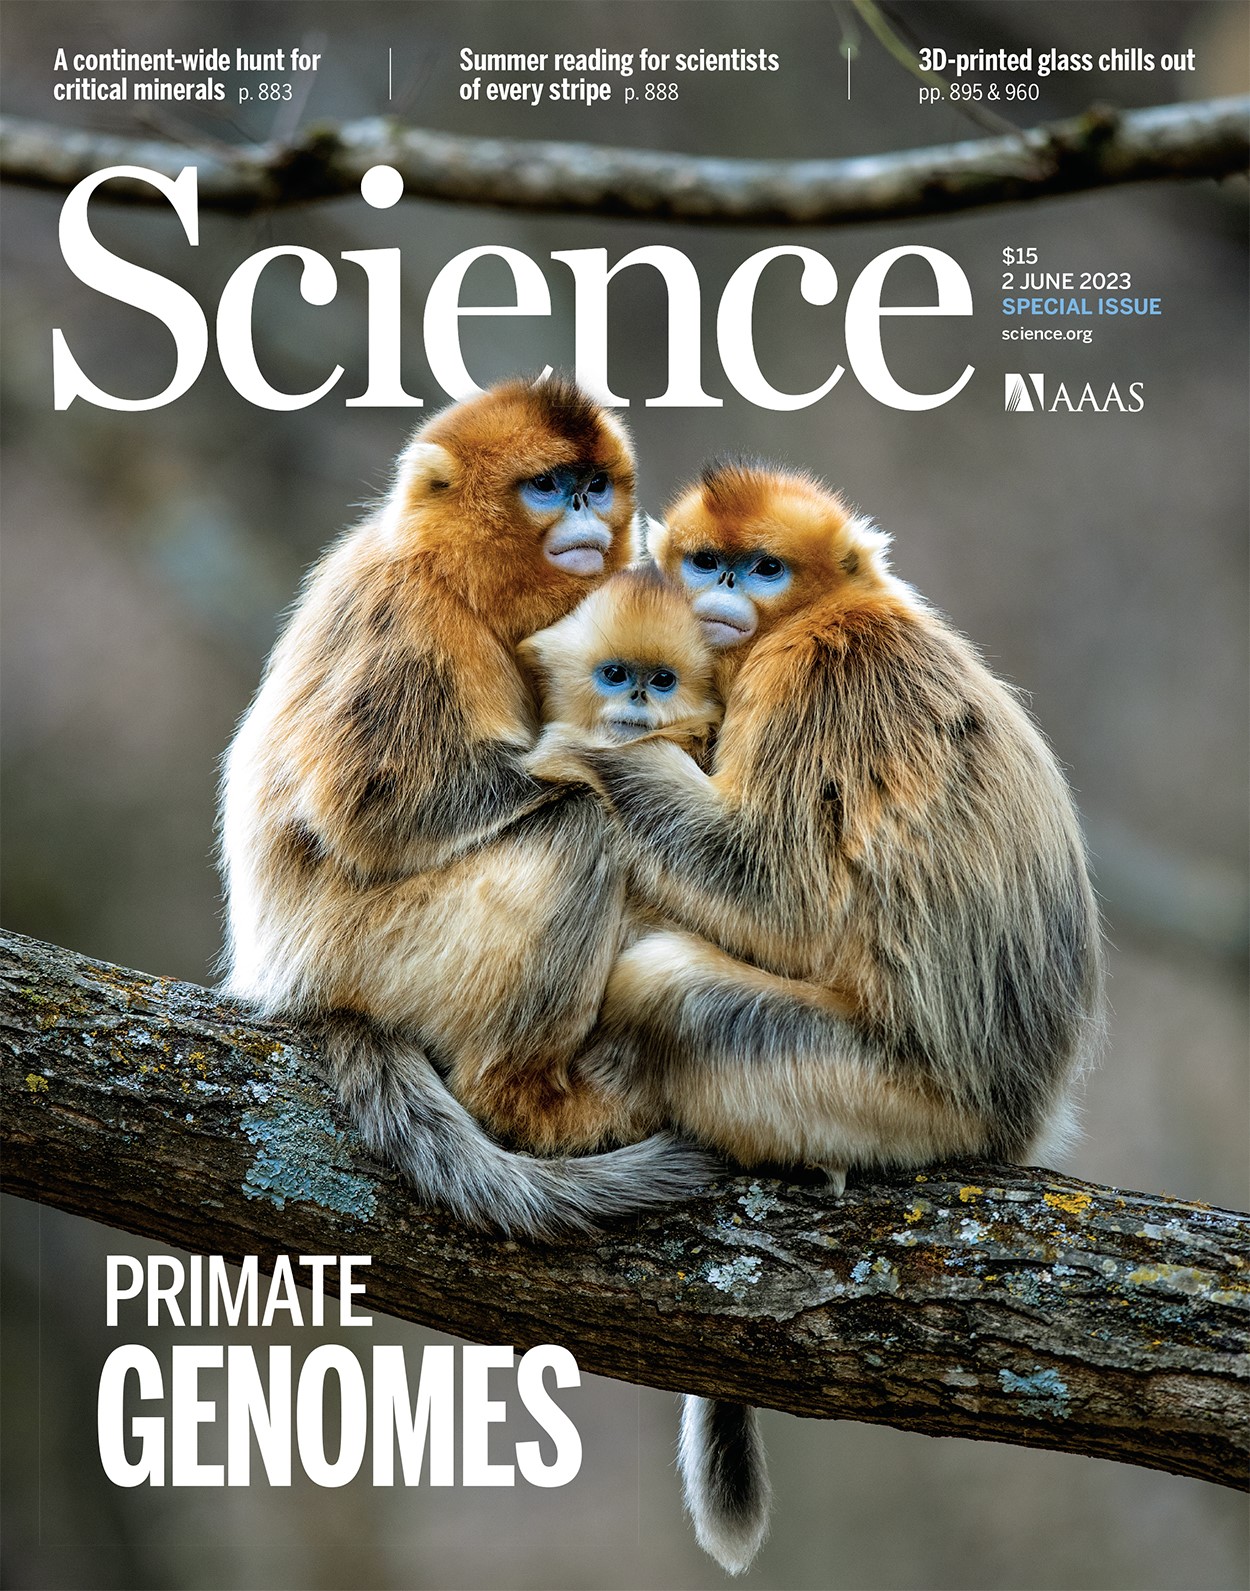 Cover of the June 2023 Science magazine featuring primate genomes research.